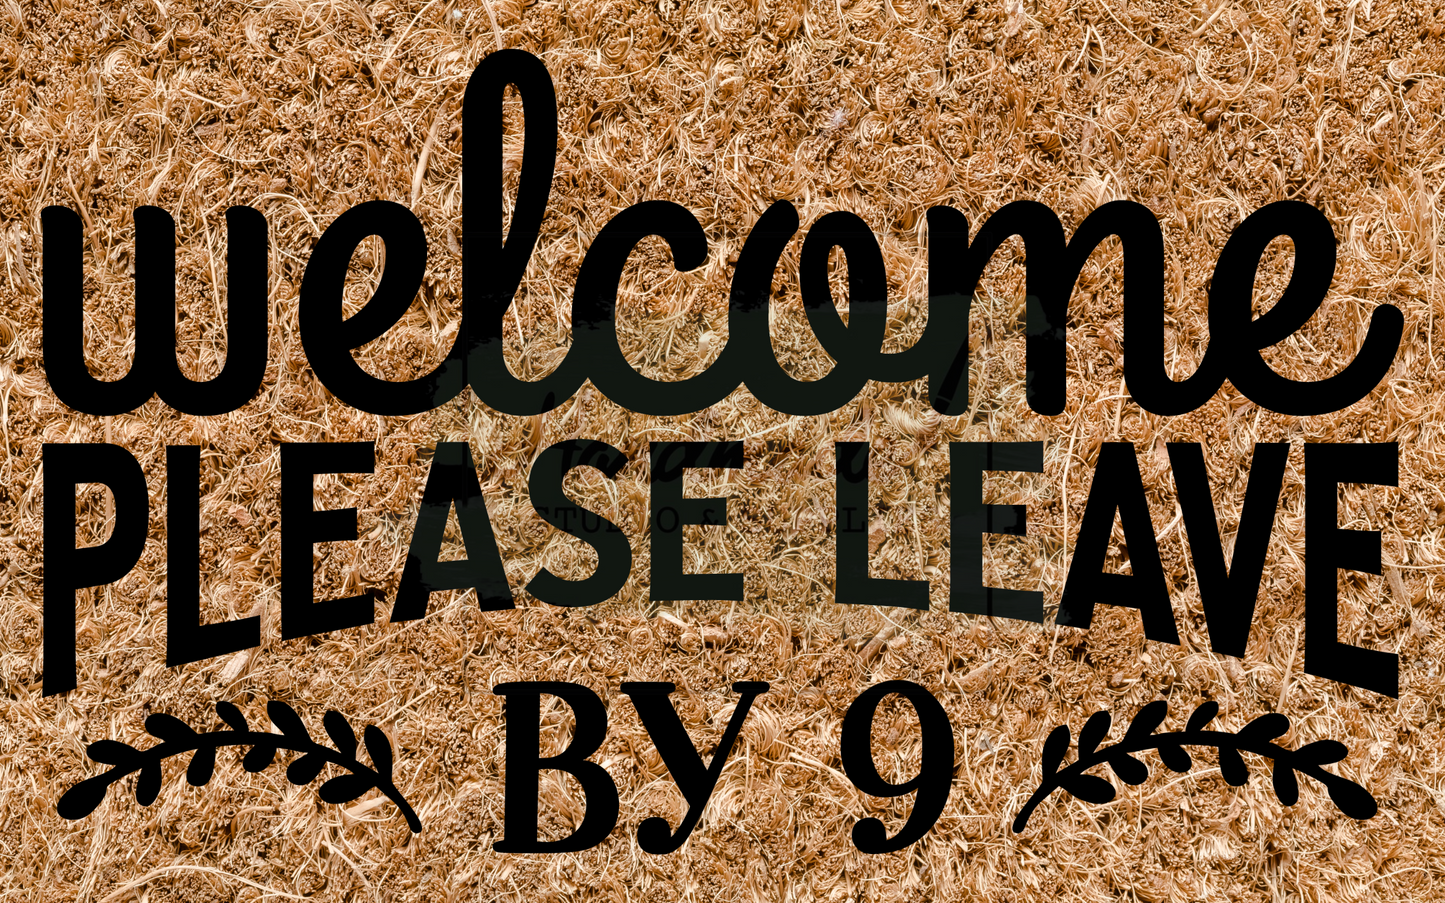 Welcome please leave by 9 - greenery